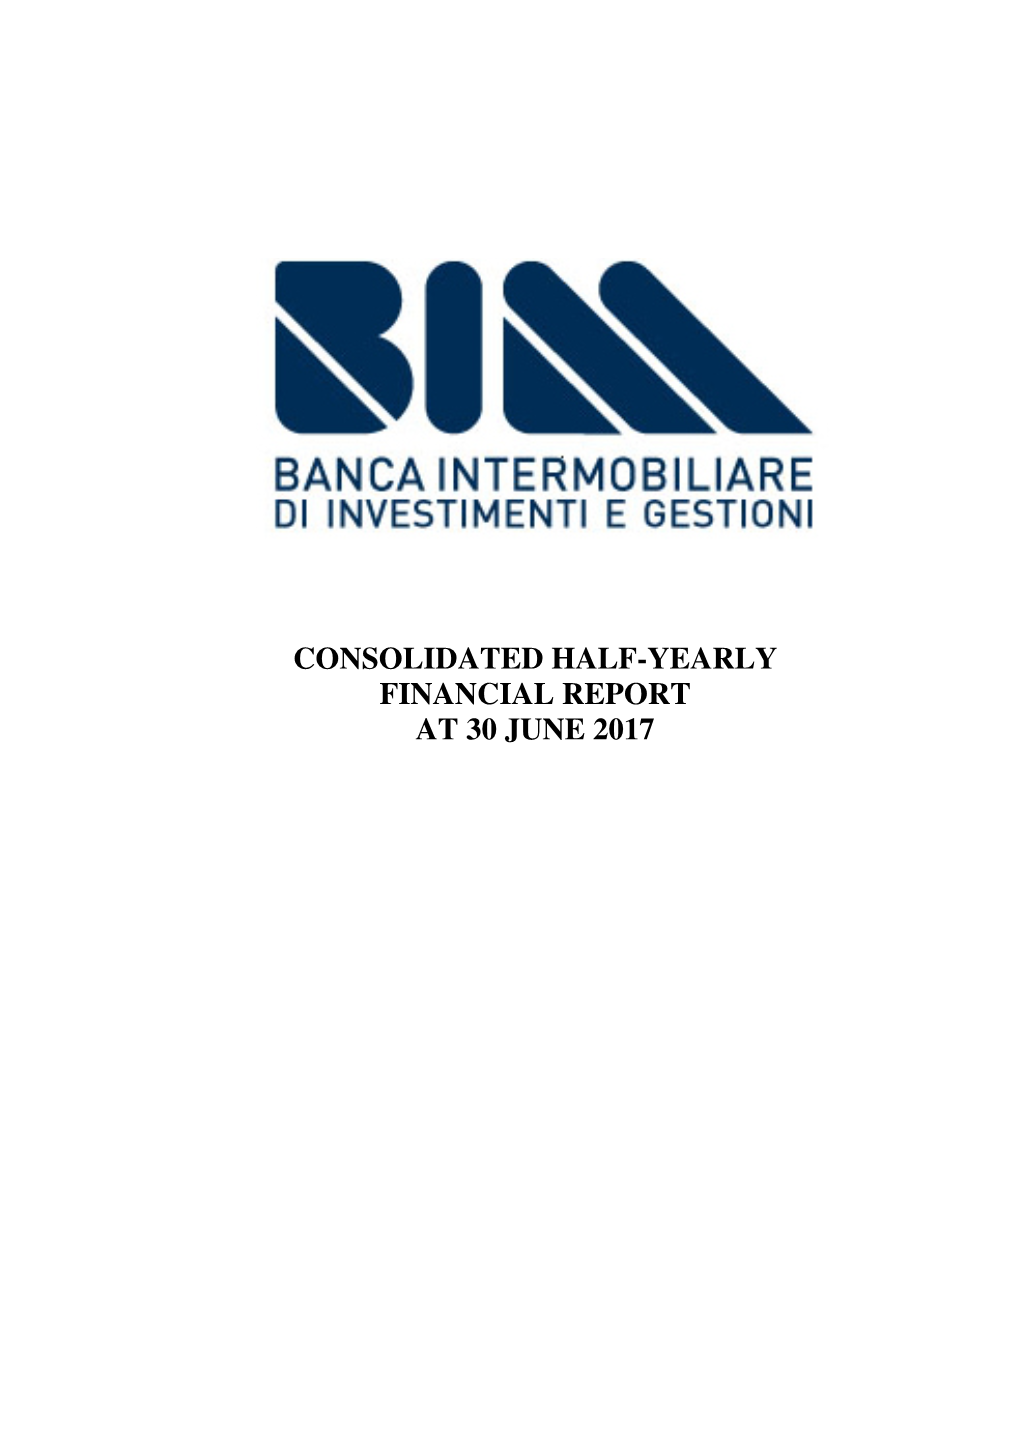 Consolidated Half-Yearly Financial Report at 30 June 2017